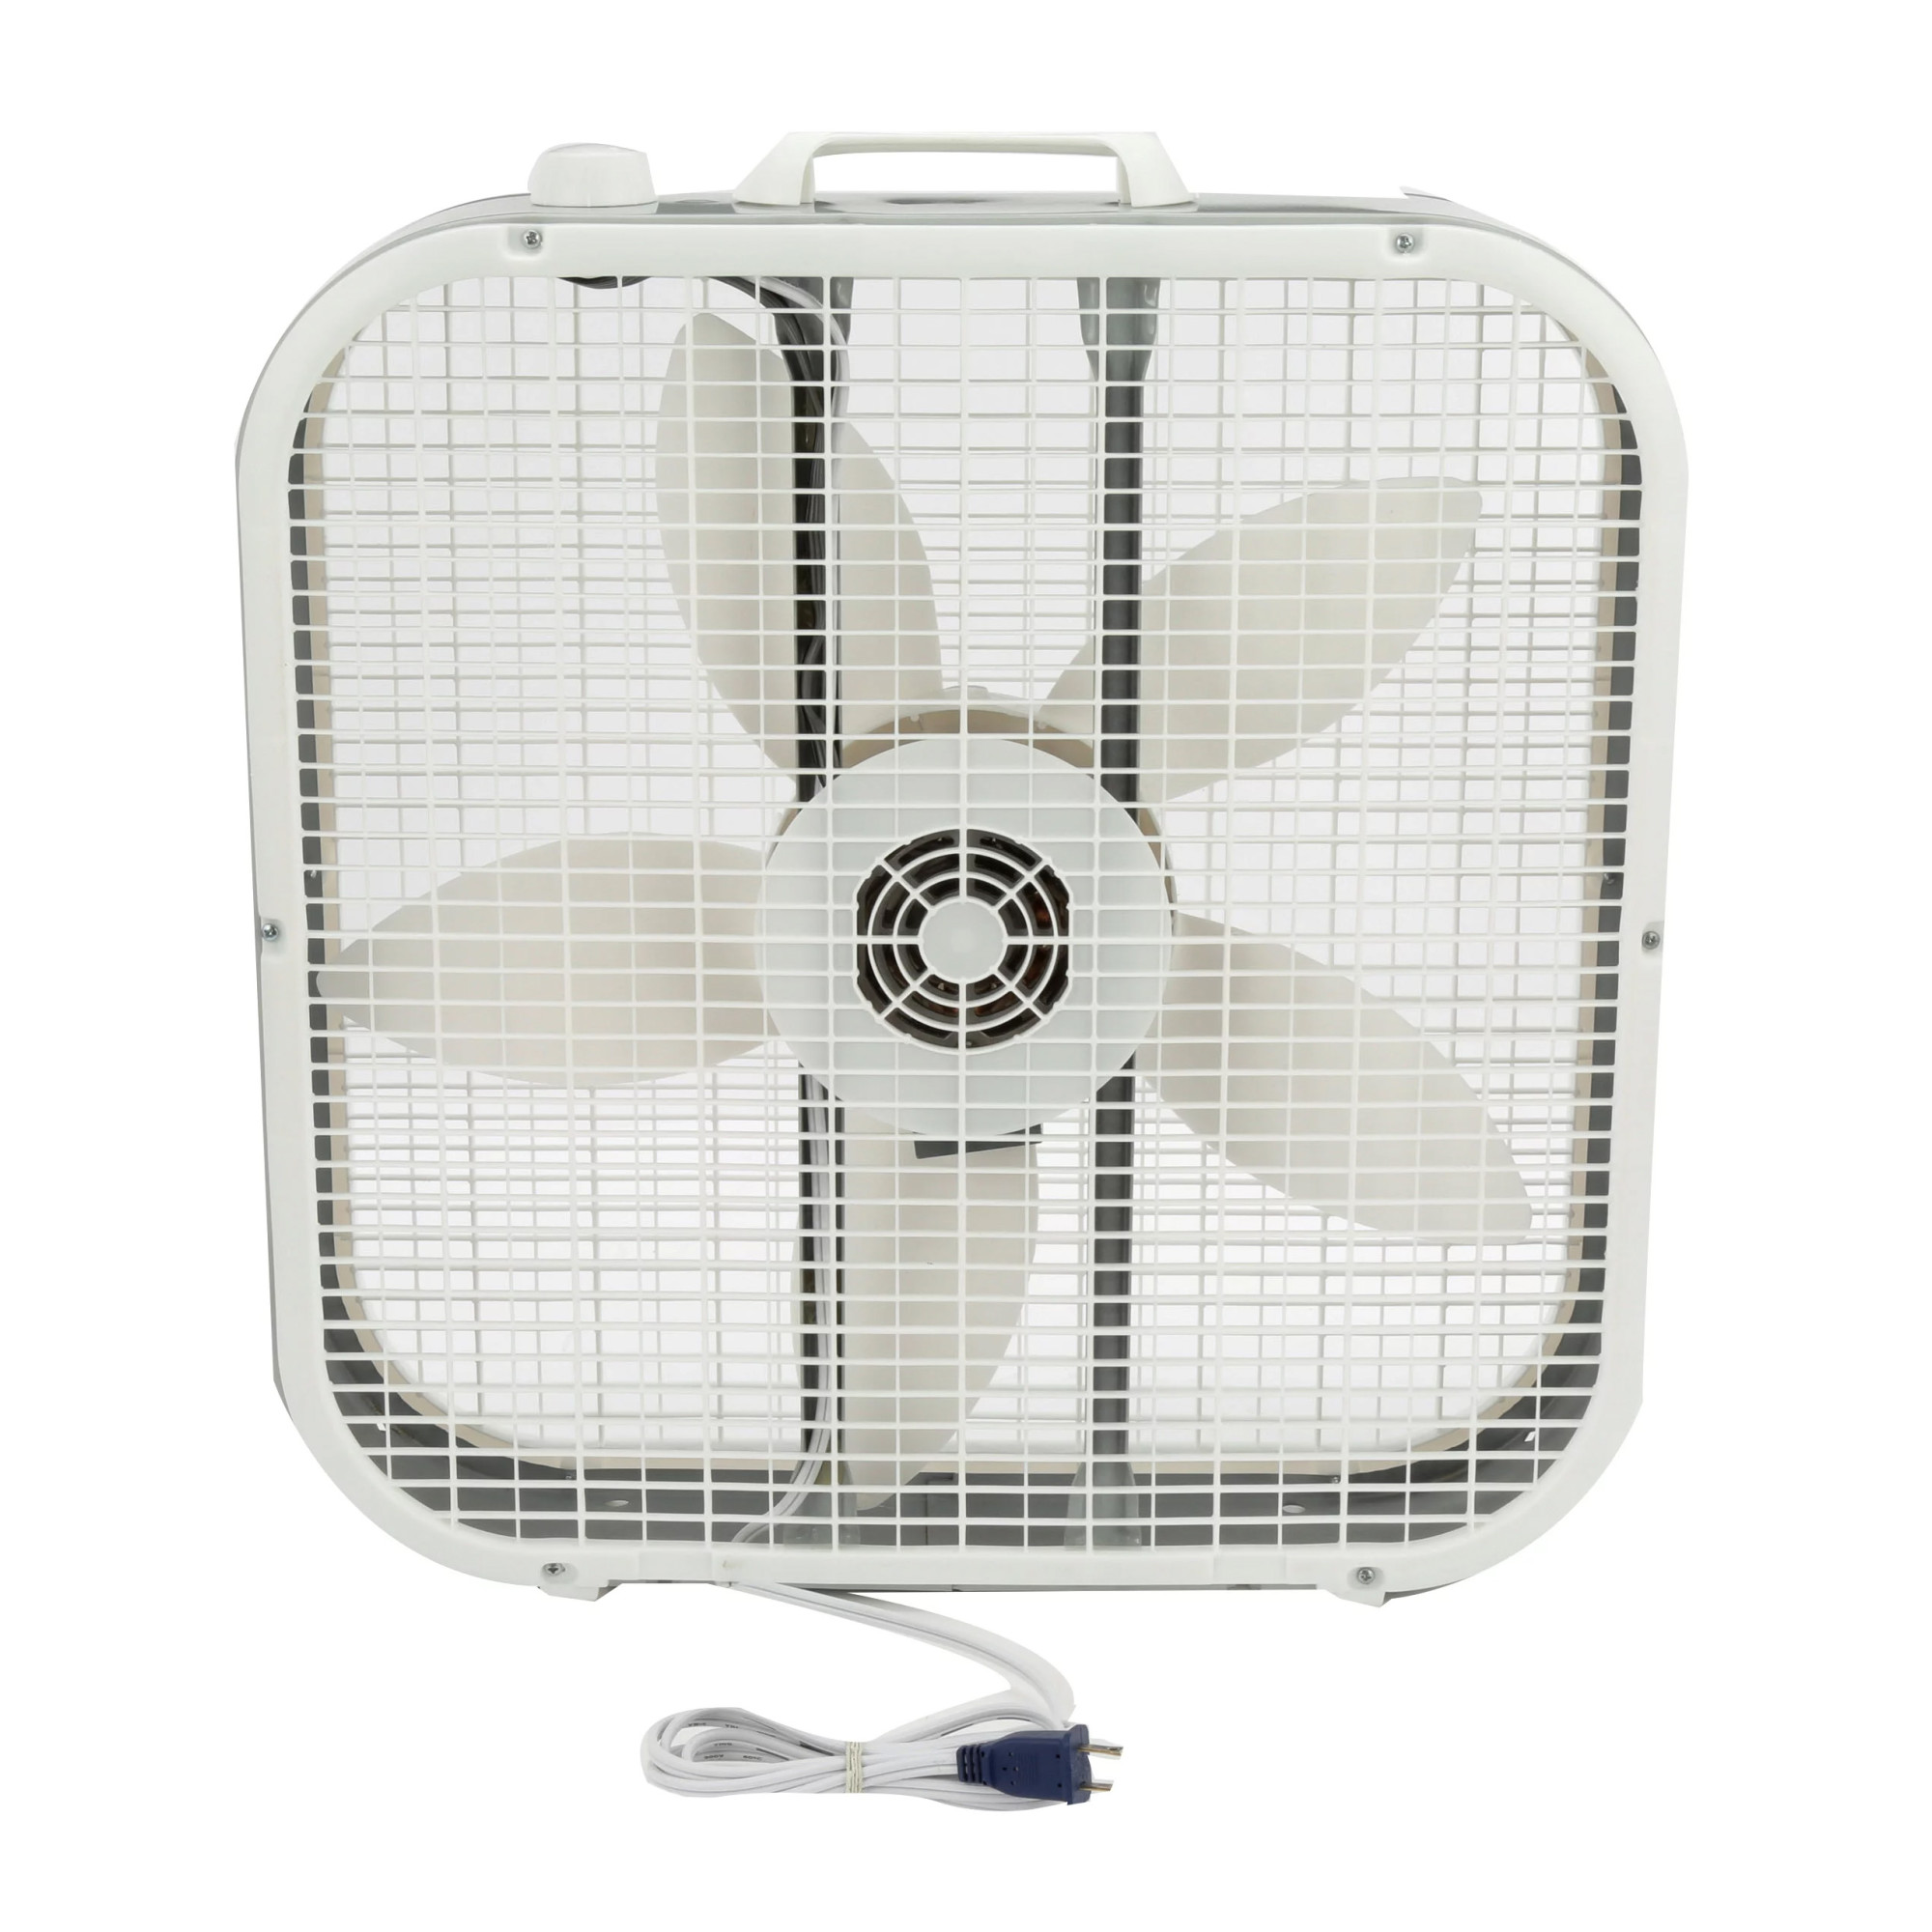 Lasko 20" Classic Box Fan with Weather-Resistant Motor, 3 Speeds, 22.5" H, White, B20200, New - image 4 of 7